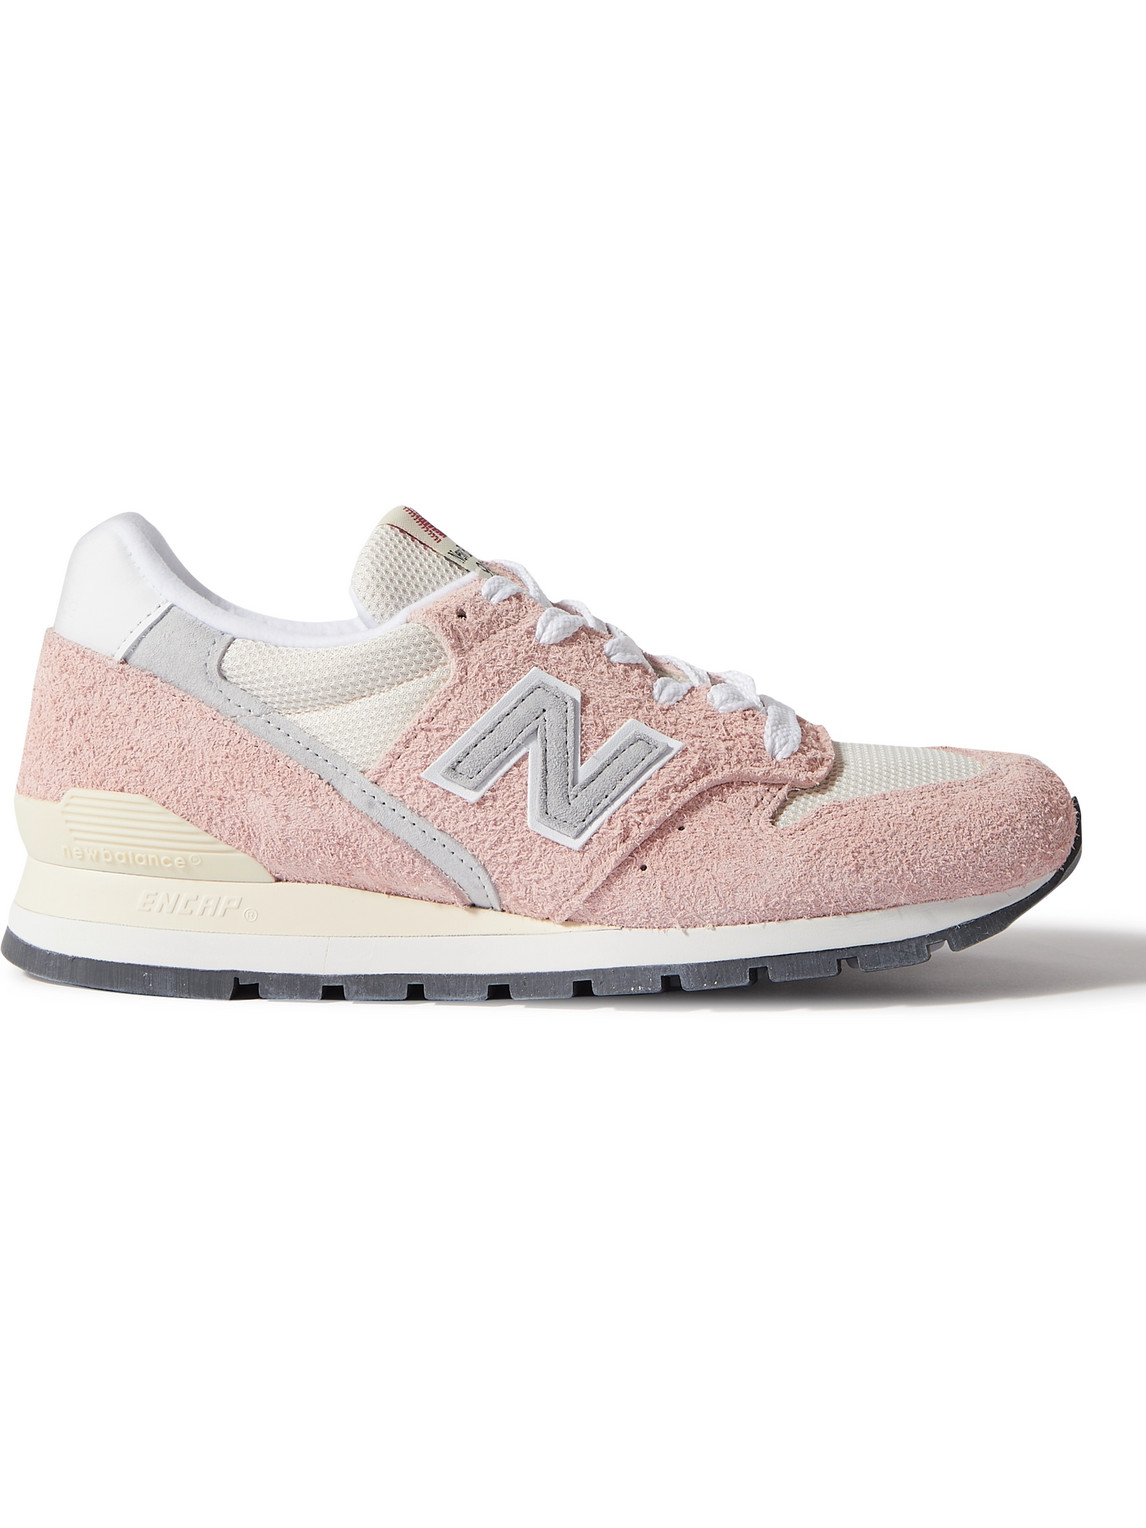 New Balance Made In Usa 996 Trainers In Pink | ModeSens